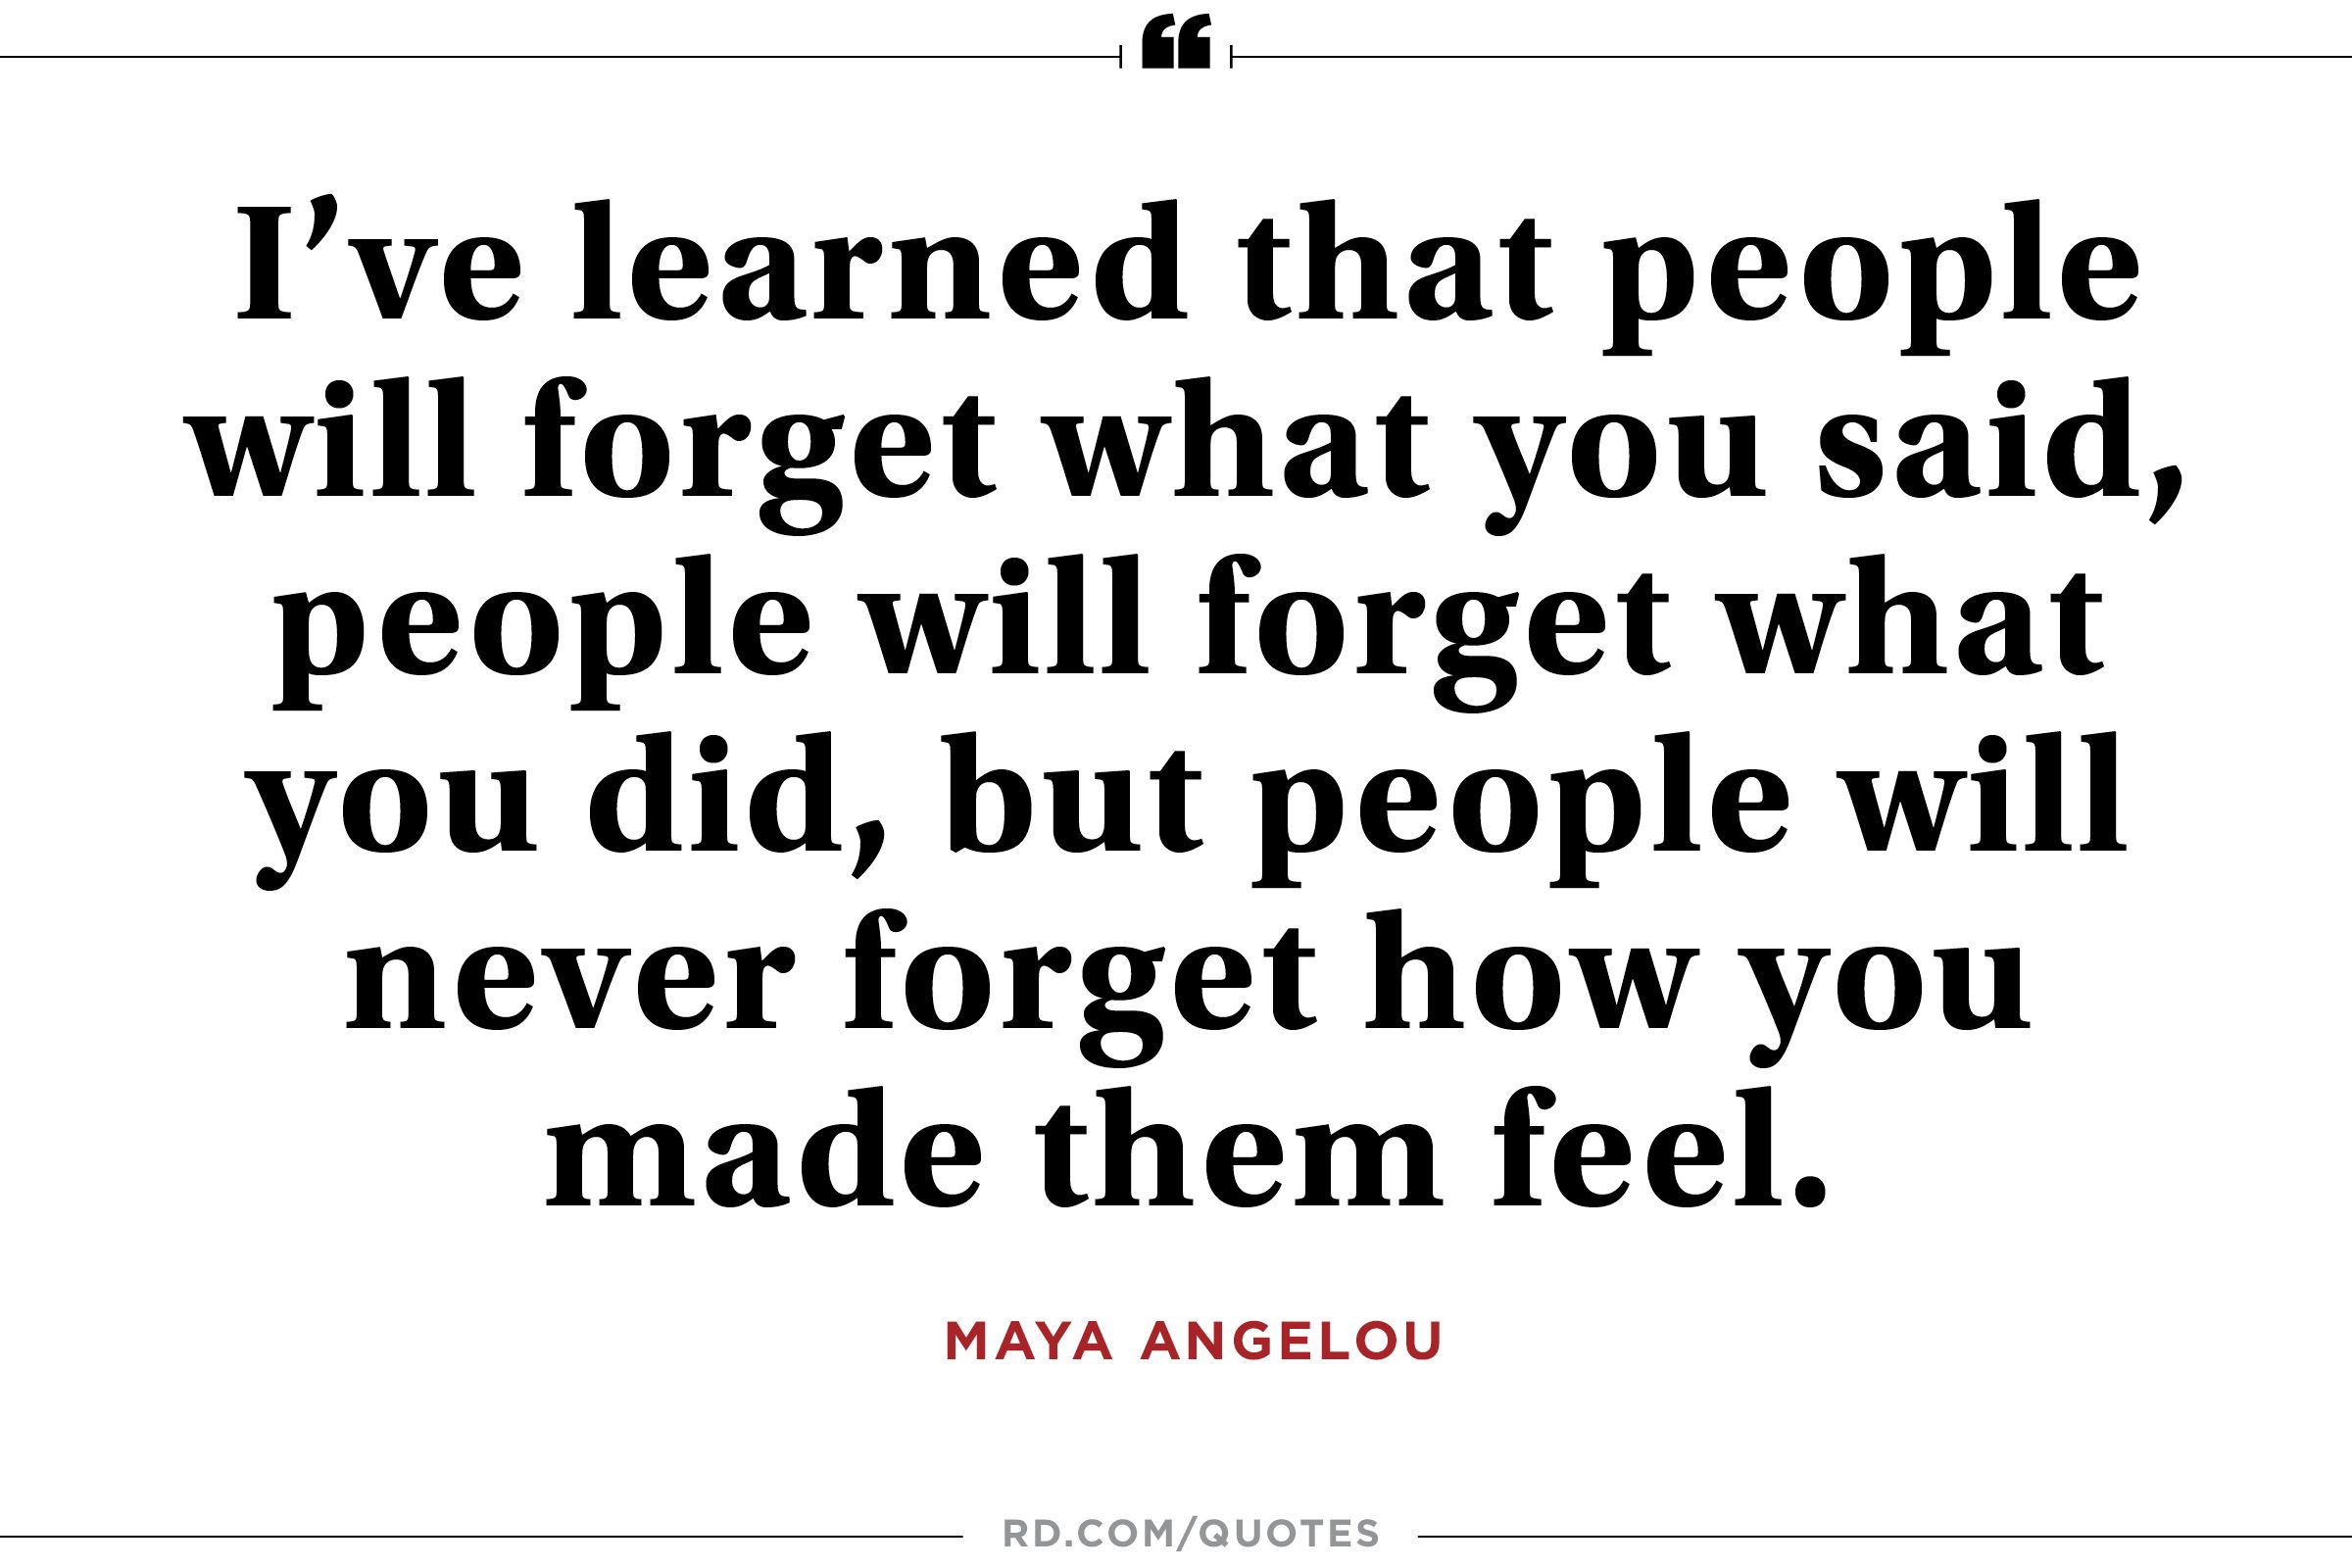 Maya Angelou At Her Best 8 Quotable Quotes